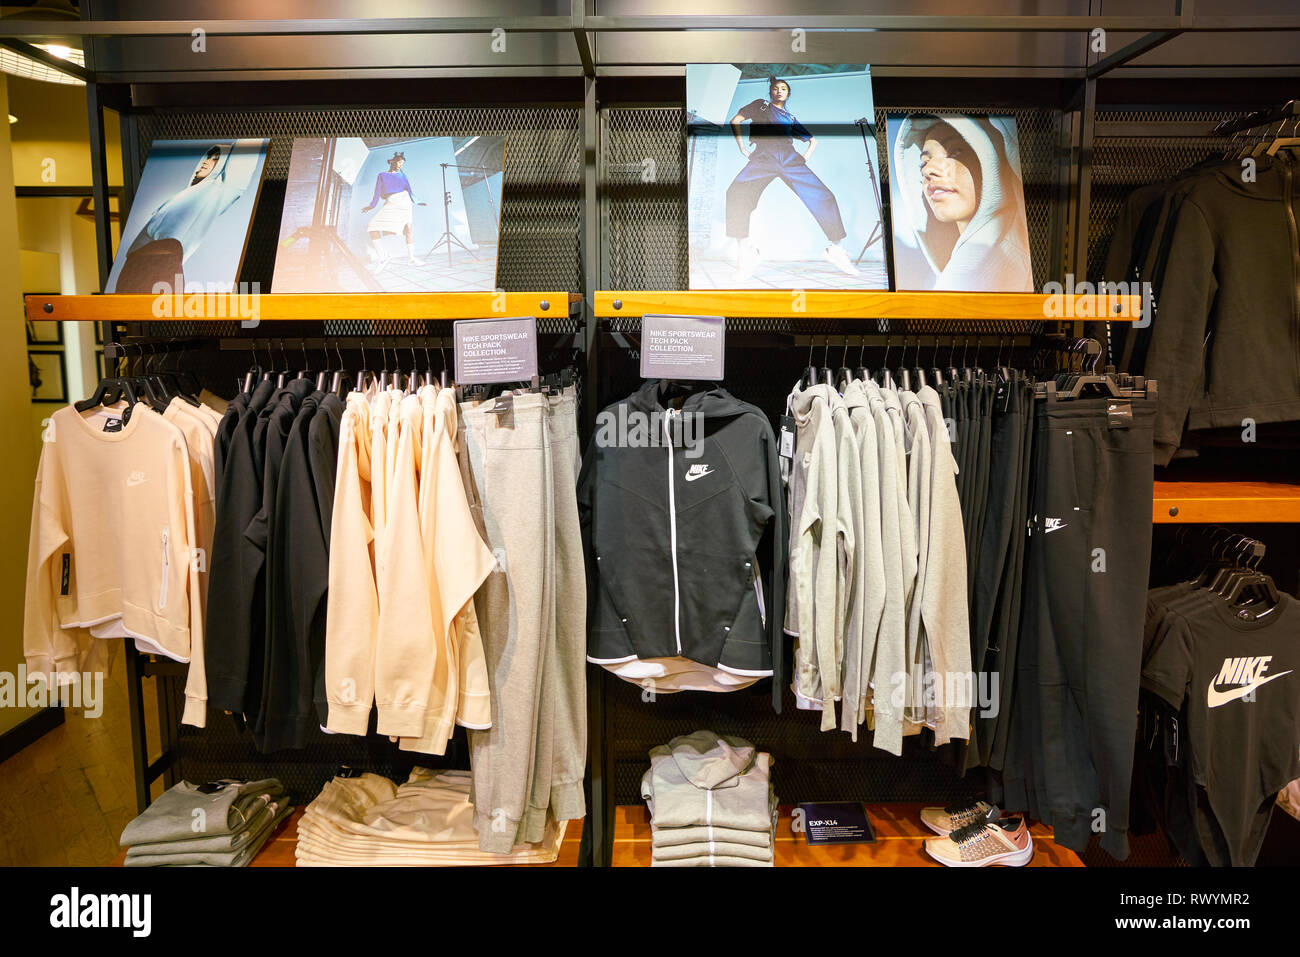 MOSCOW, RUSSIA - CIRCA SEPTEMBER, 2018: interior shot of Nike store in  Moscow Stock Photo - Alamy